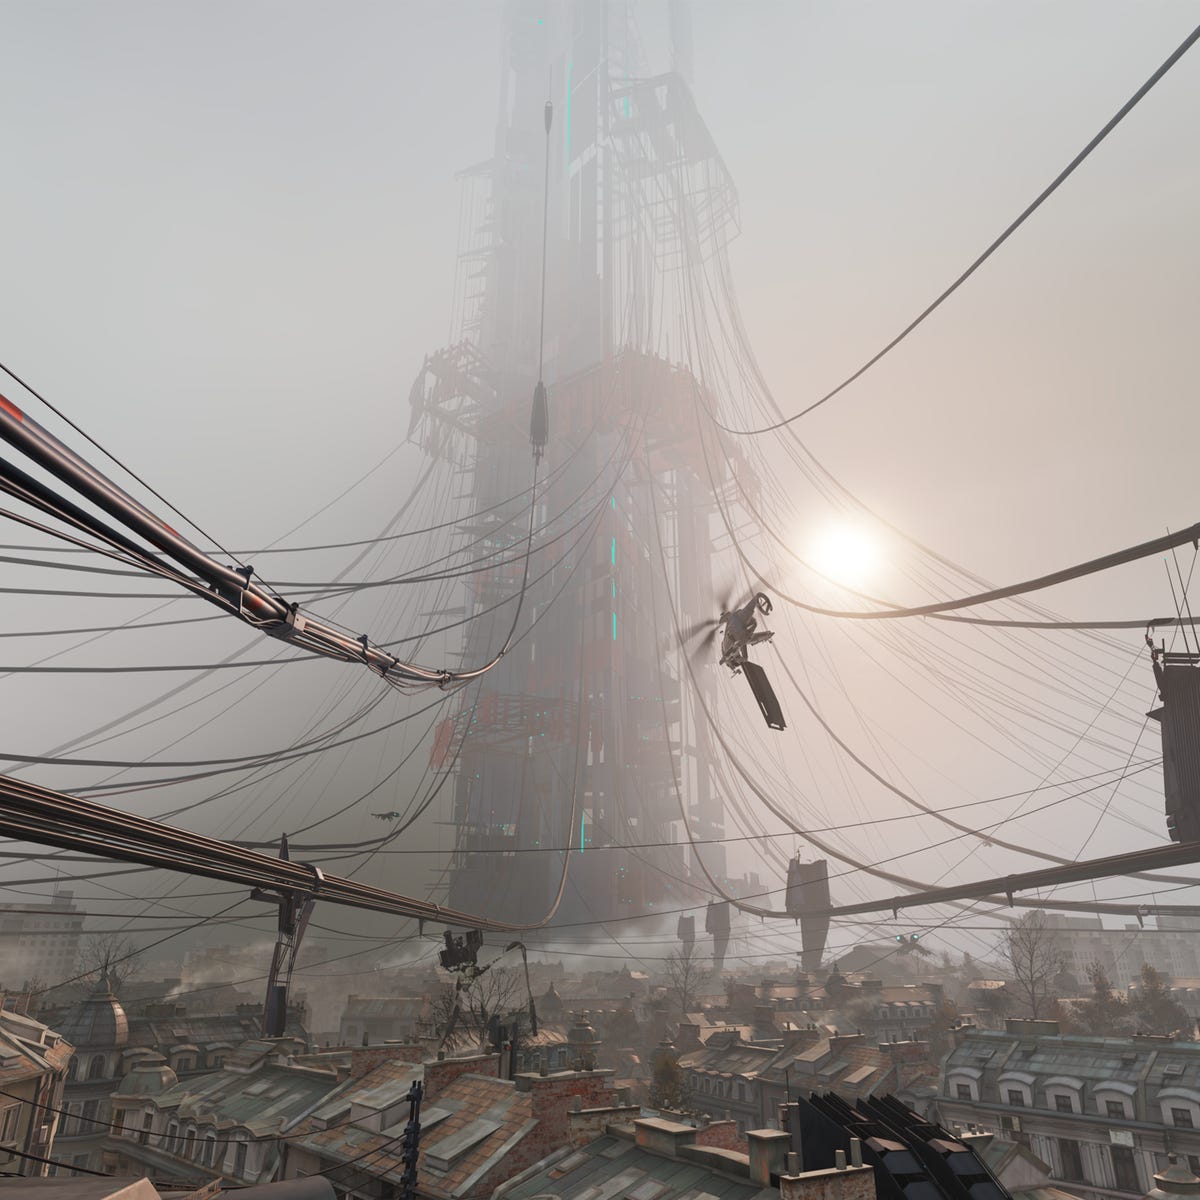 Half-Life: Alyx review: VR dystopia, played in a real-life dystopia - CNET